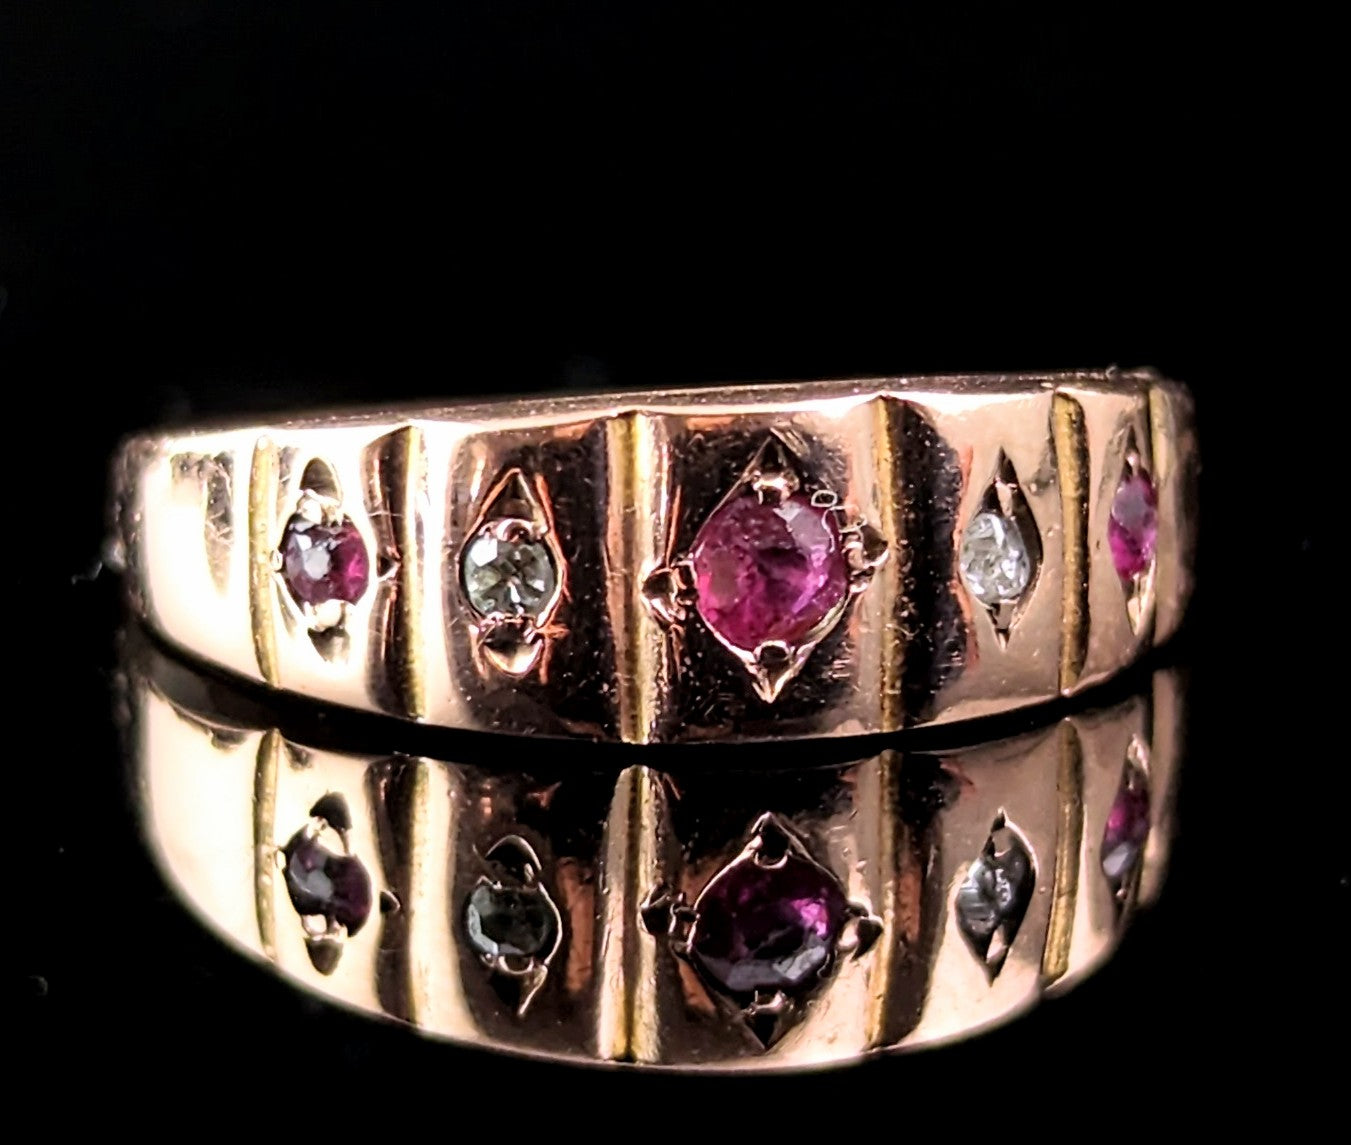 Antique Ruby and Diamond band ring, 9ct gold, Art Deco